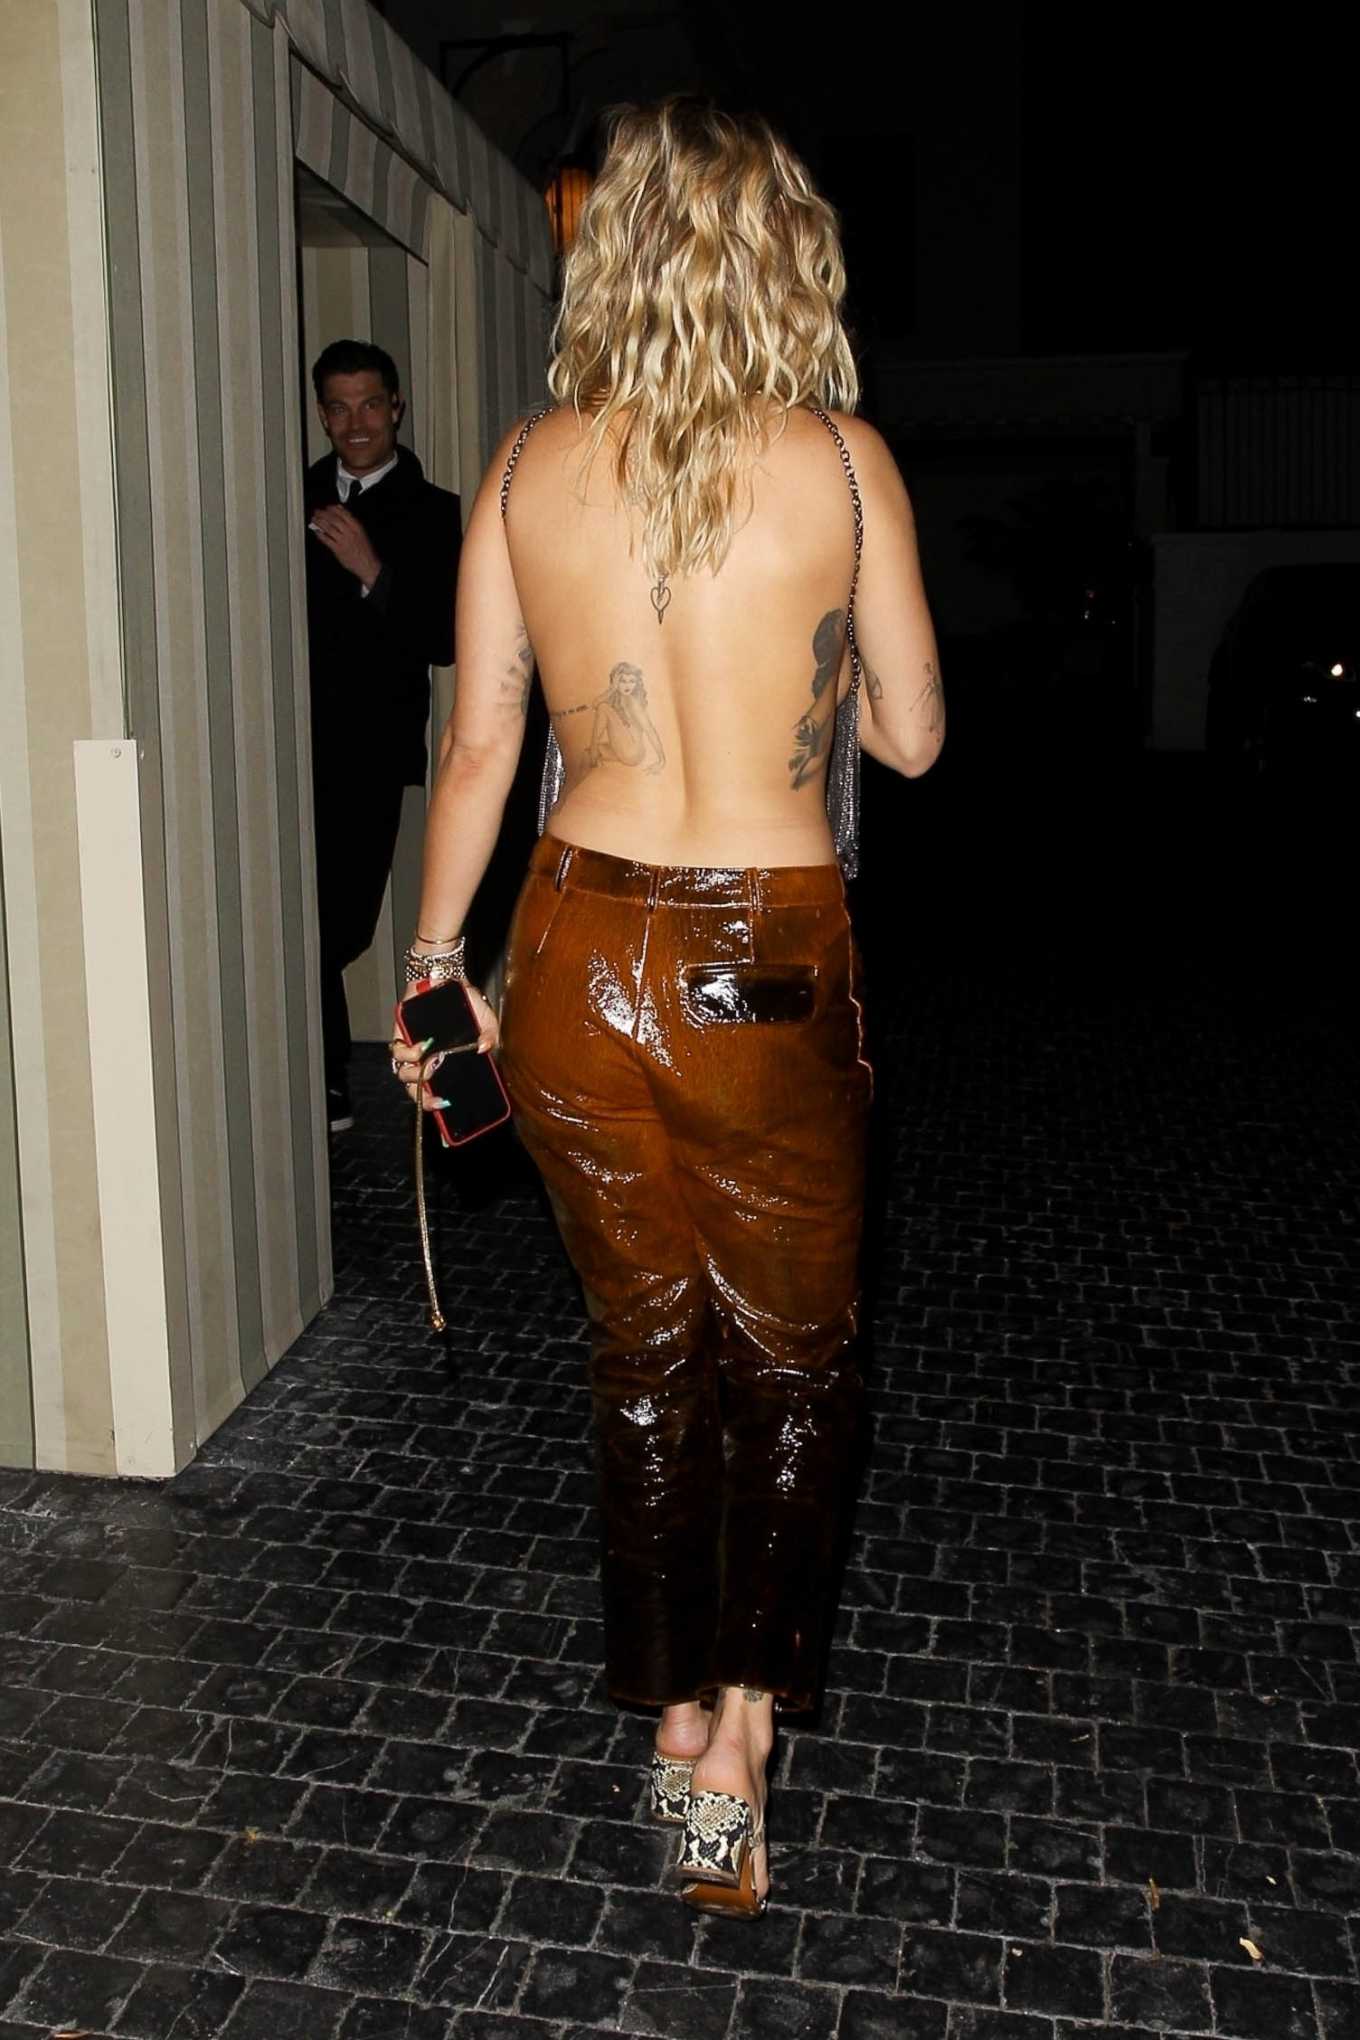 Rita Ora in Backless Sequin Top and Leather Pants at Chateau Marmont in